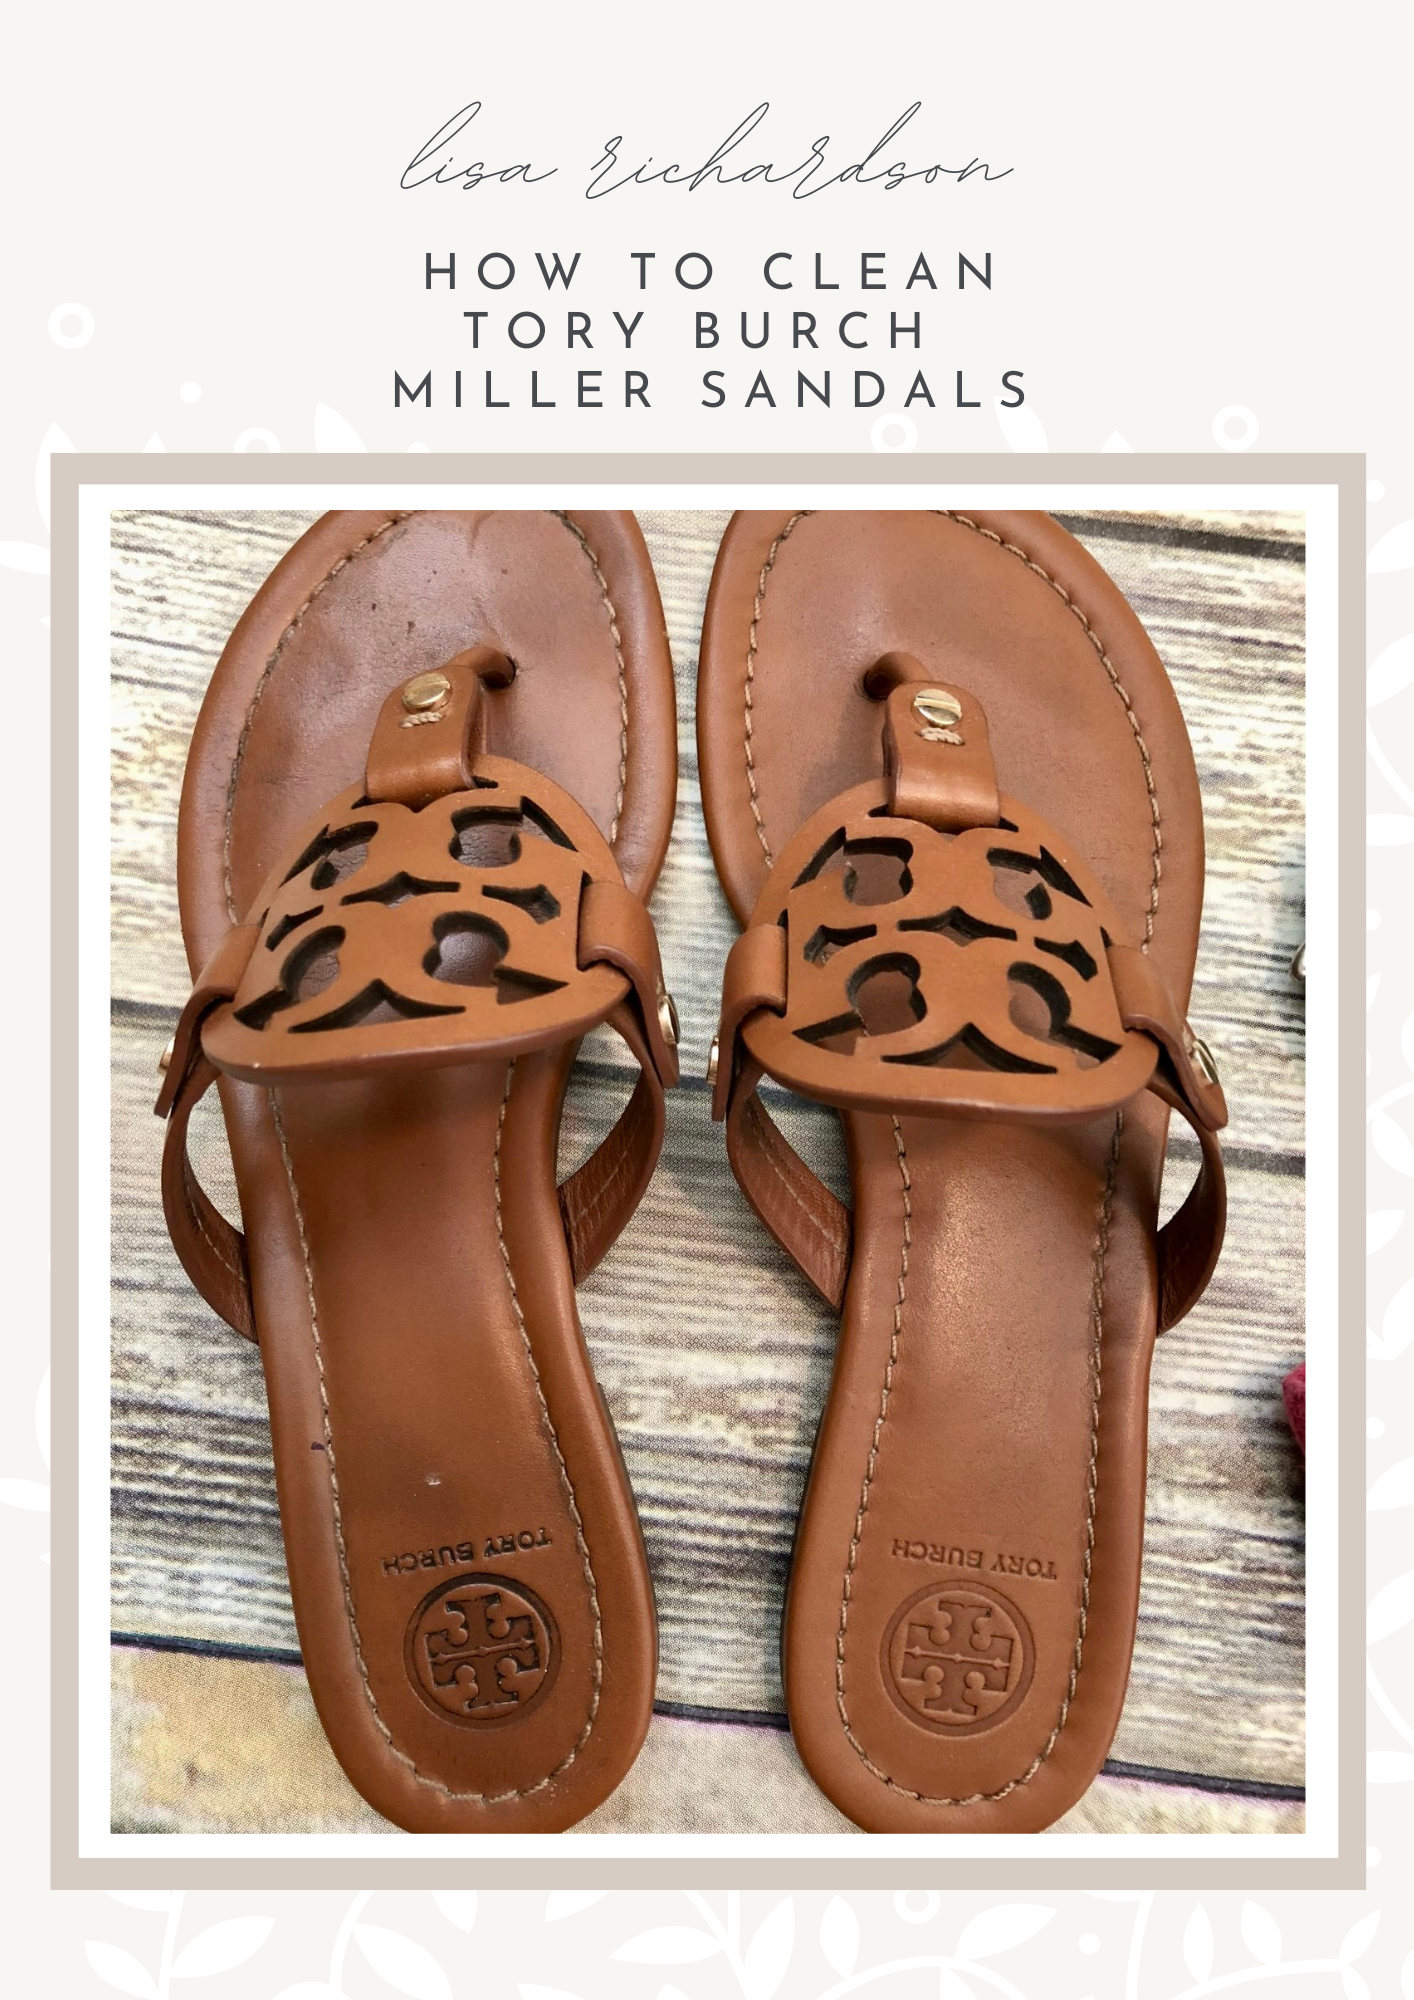 Tory Burch on X: Many people have commented that they didn't